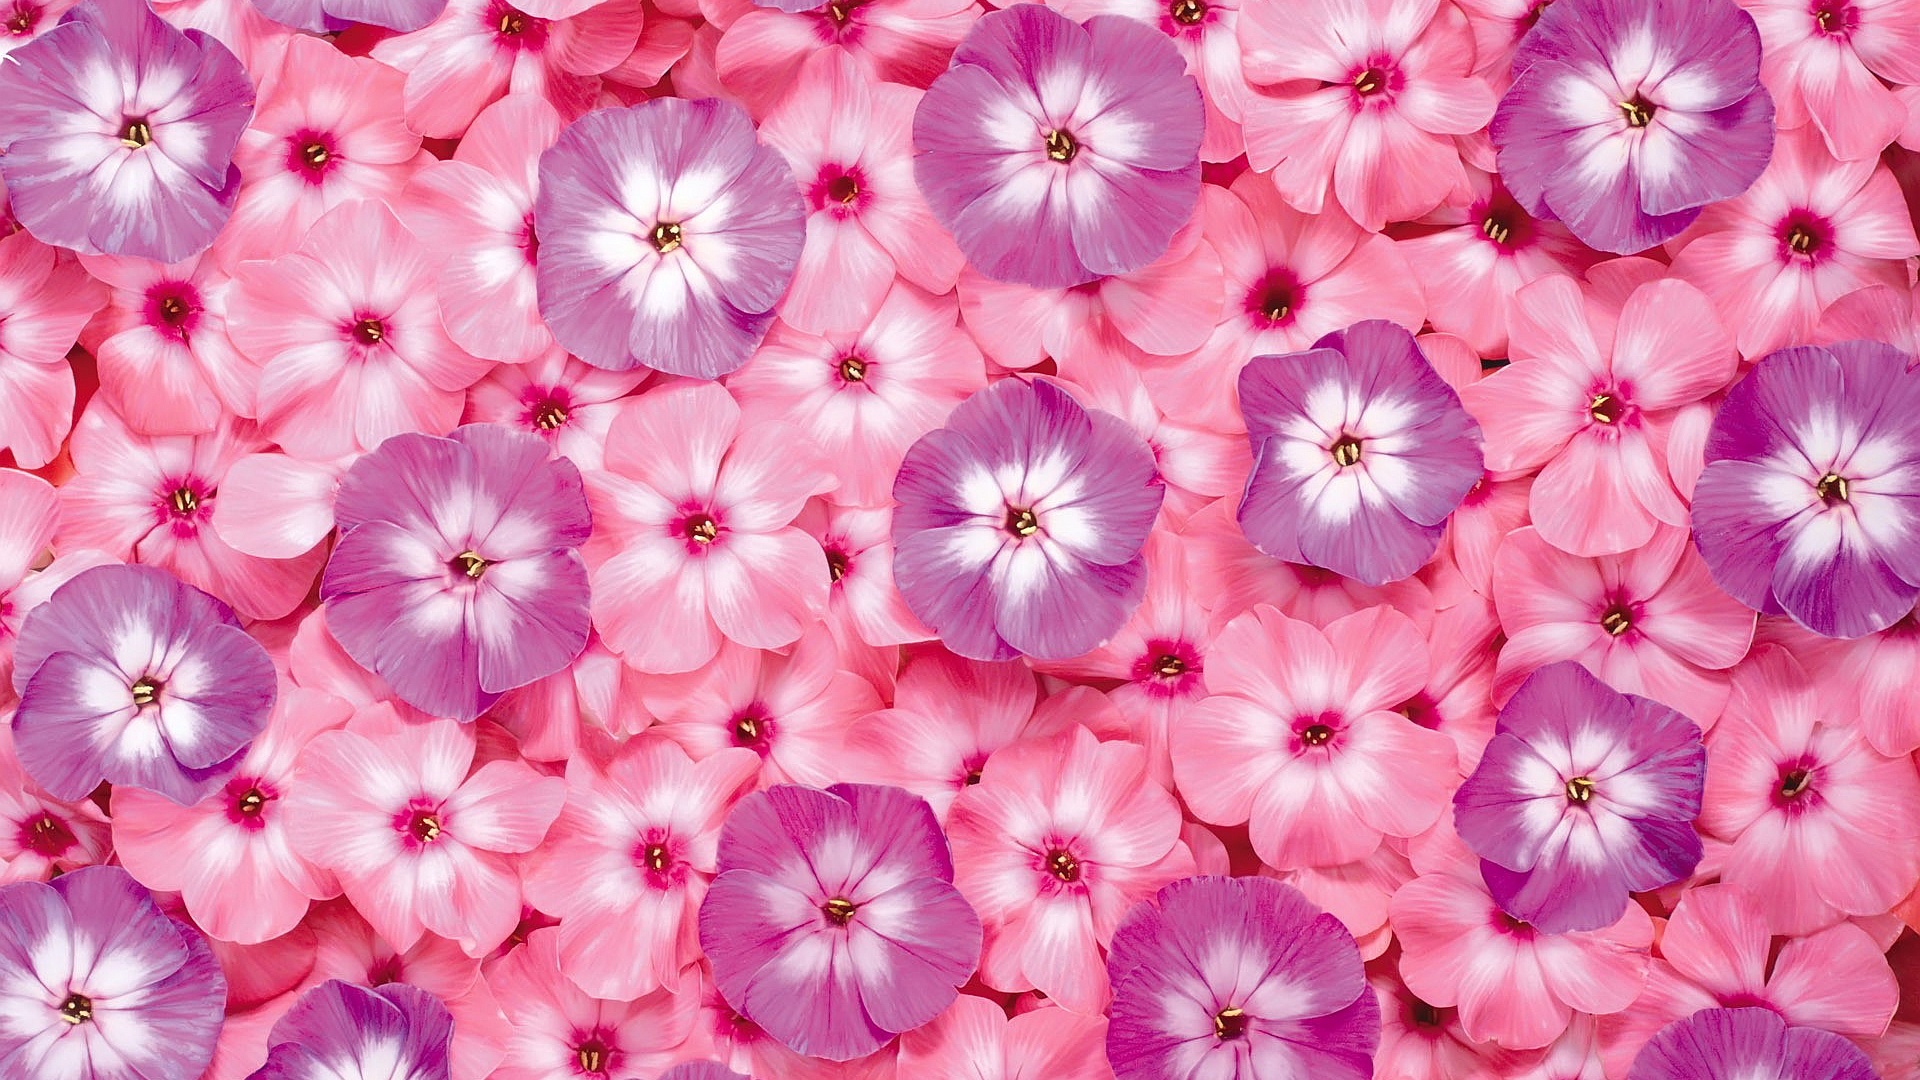 More Beautiful Pink Flowers Background Wallpaper | FLgrx Graphics